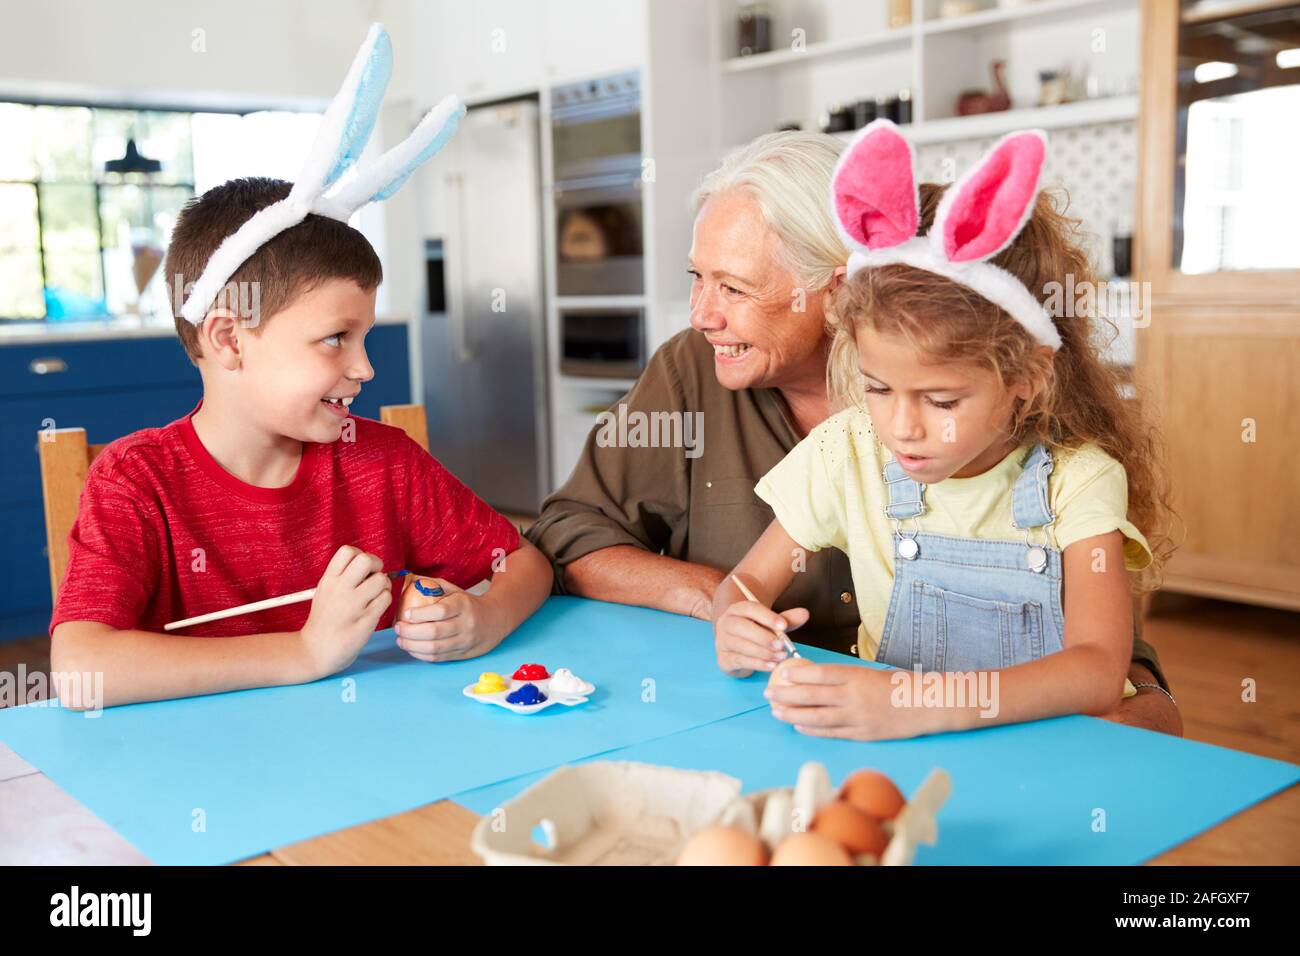 Grandmother With Grandchildren Wearing Rabbit Ears Decorating Easter Eggs At Home Together Stock Photo